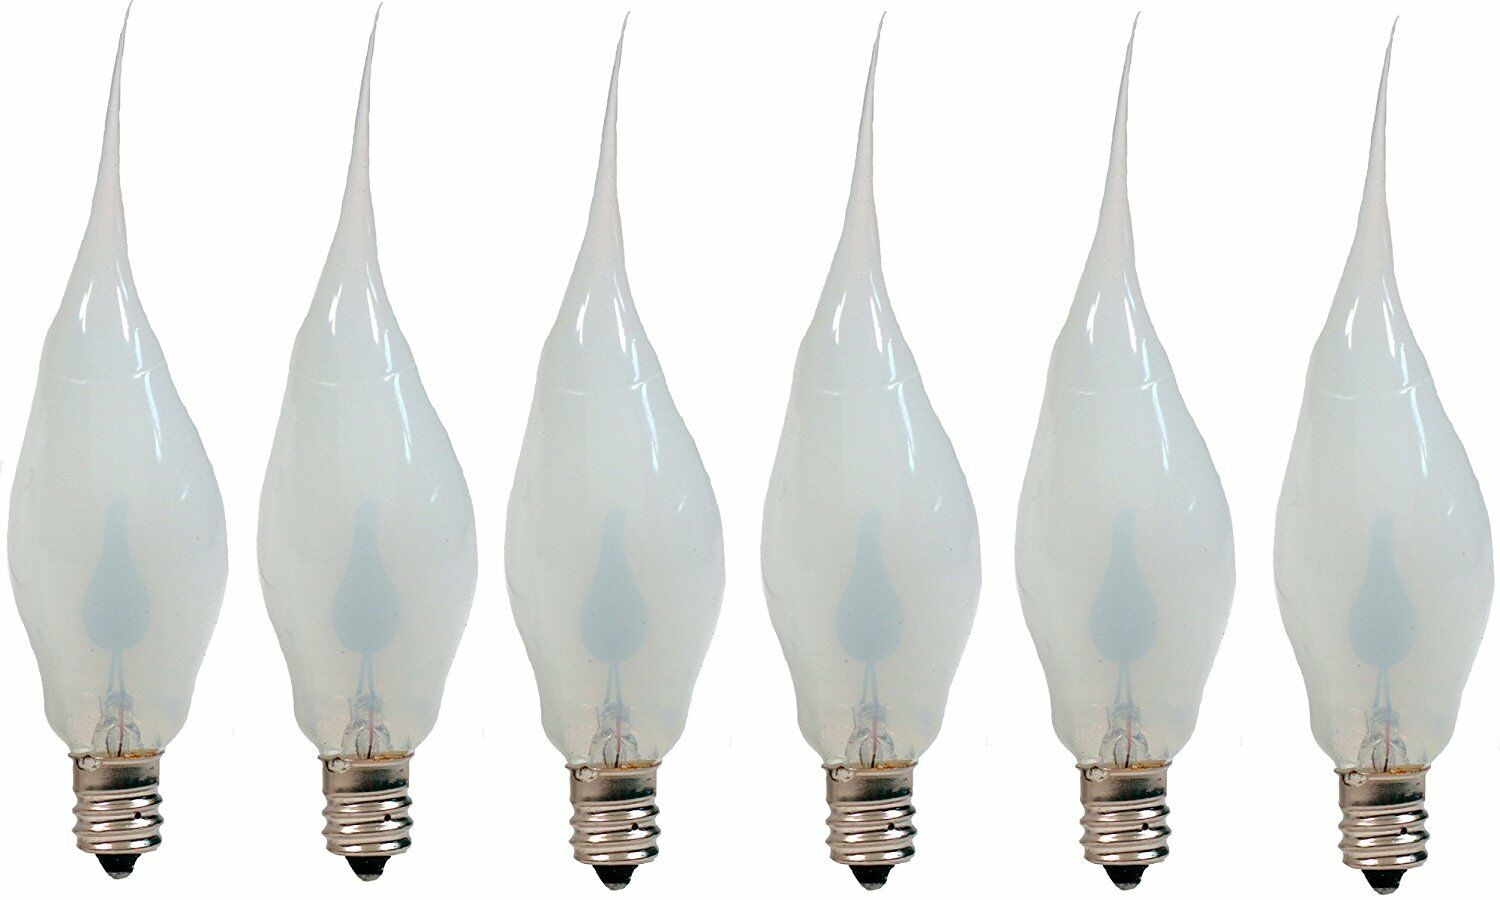 Silicone Dipped Flickering Flame Bulb, Country Candle Lamp Style, Pack of 6